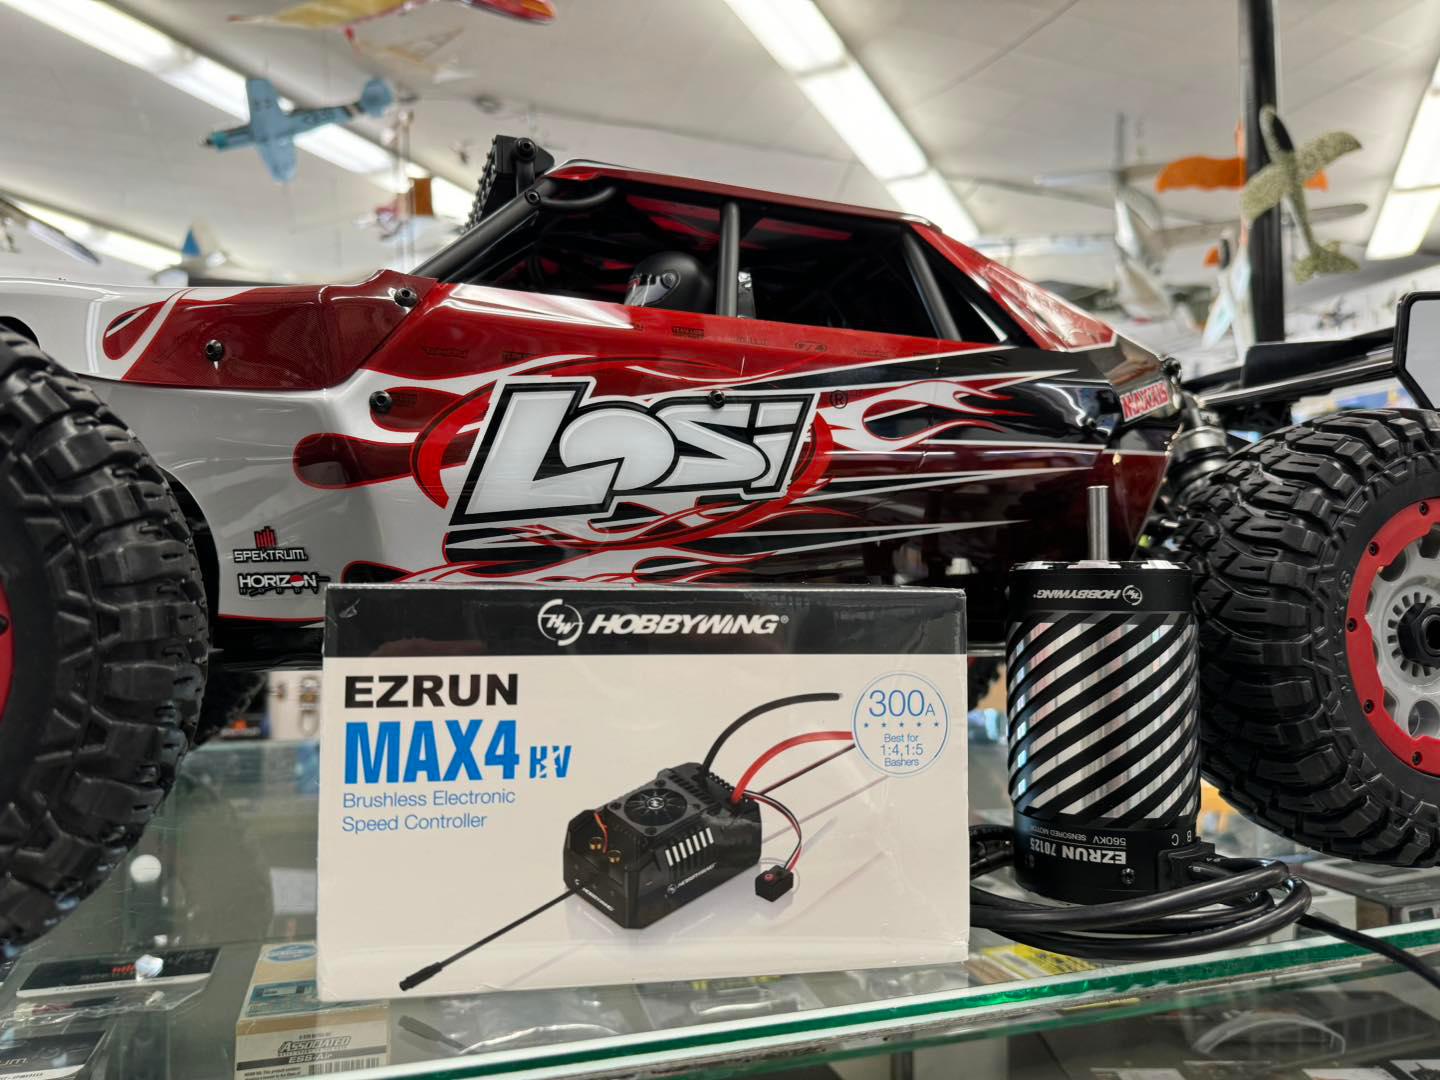 We’re finding all kinds of hidden gems around the shop during the colored tag clearance sale!

Like this Hobbywing MAX 4 ESC and matching motor. They are 30% off! A perfect upgrade for your Losi DBXL-E!